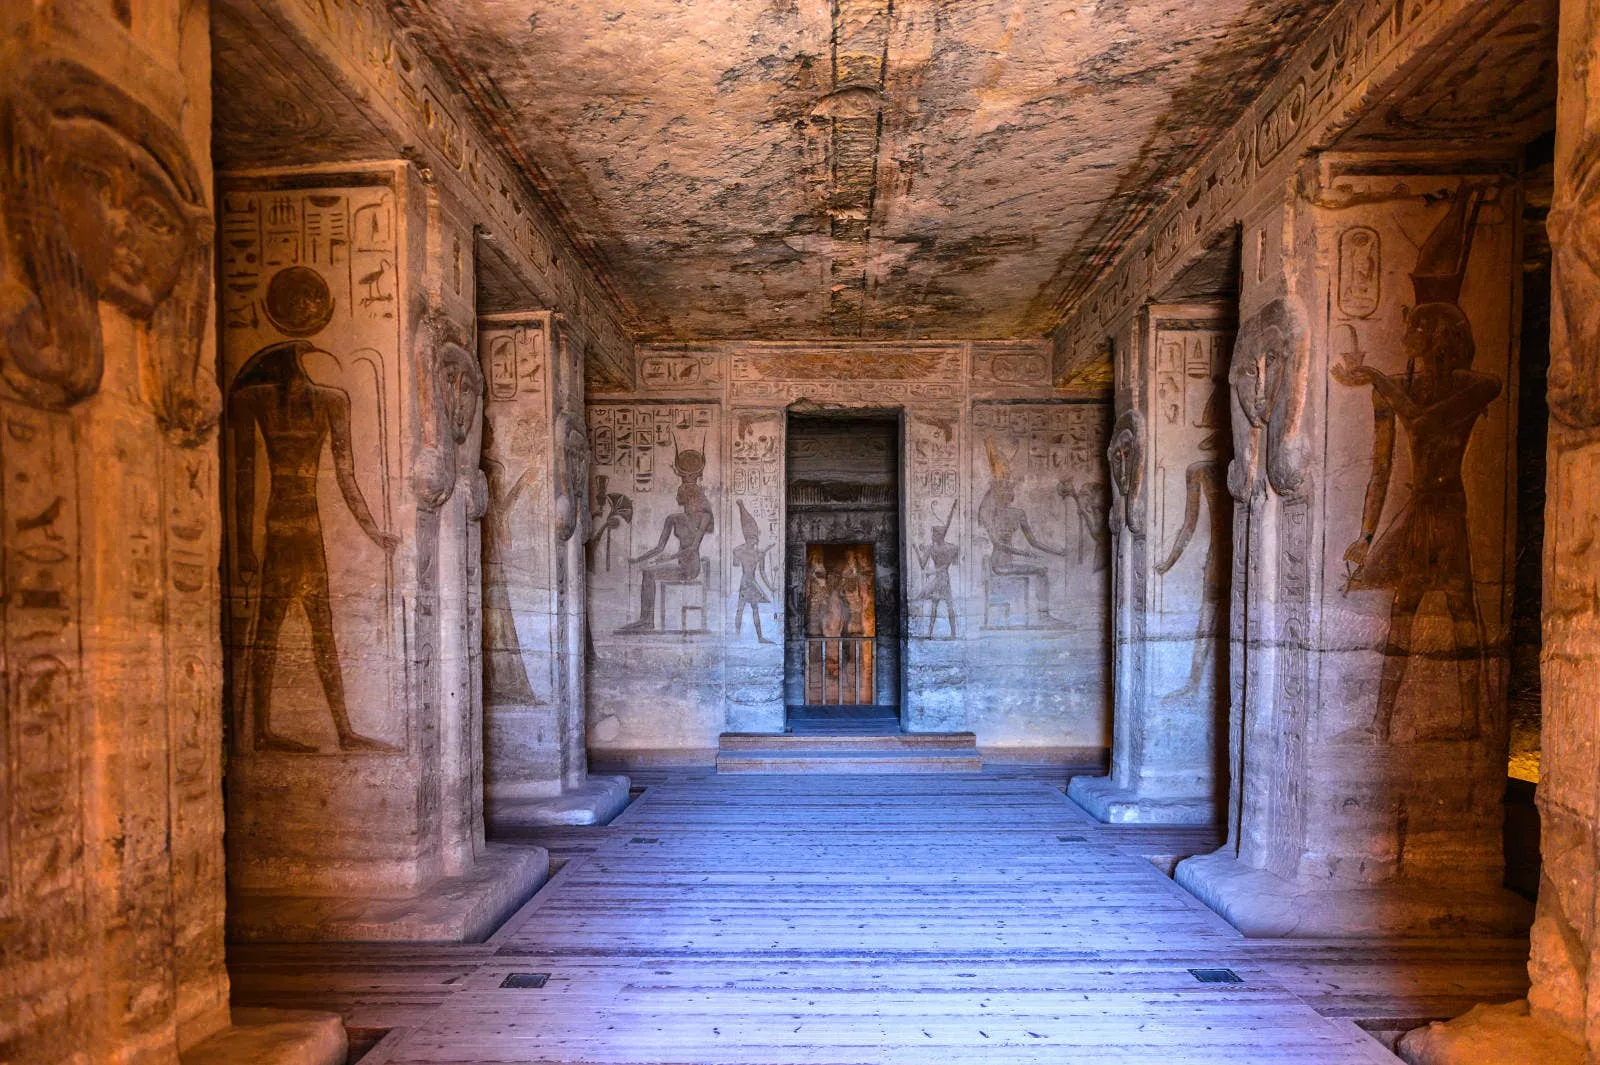 What were the main purposes of the temples & tombs of Ancient Egypt?